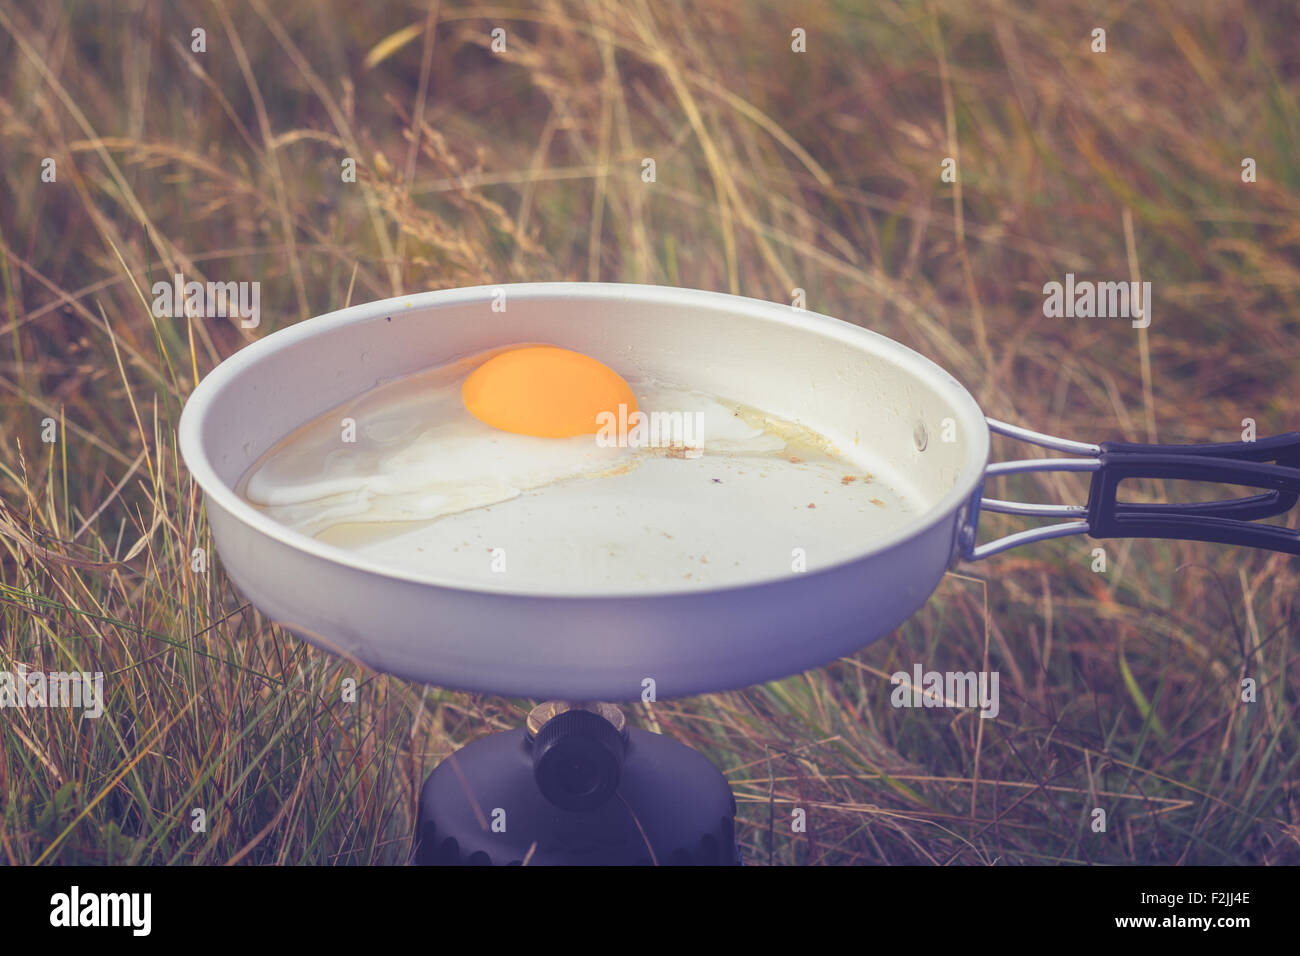 Egg frying on camping stove in nature Stock Photo